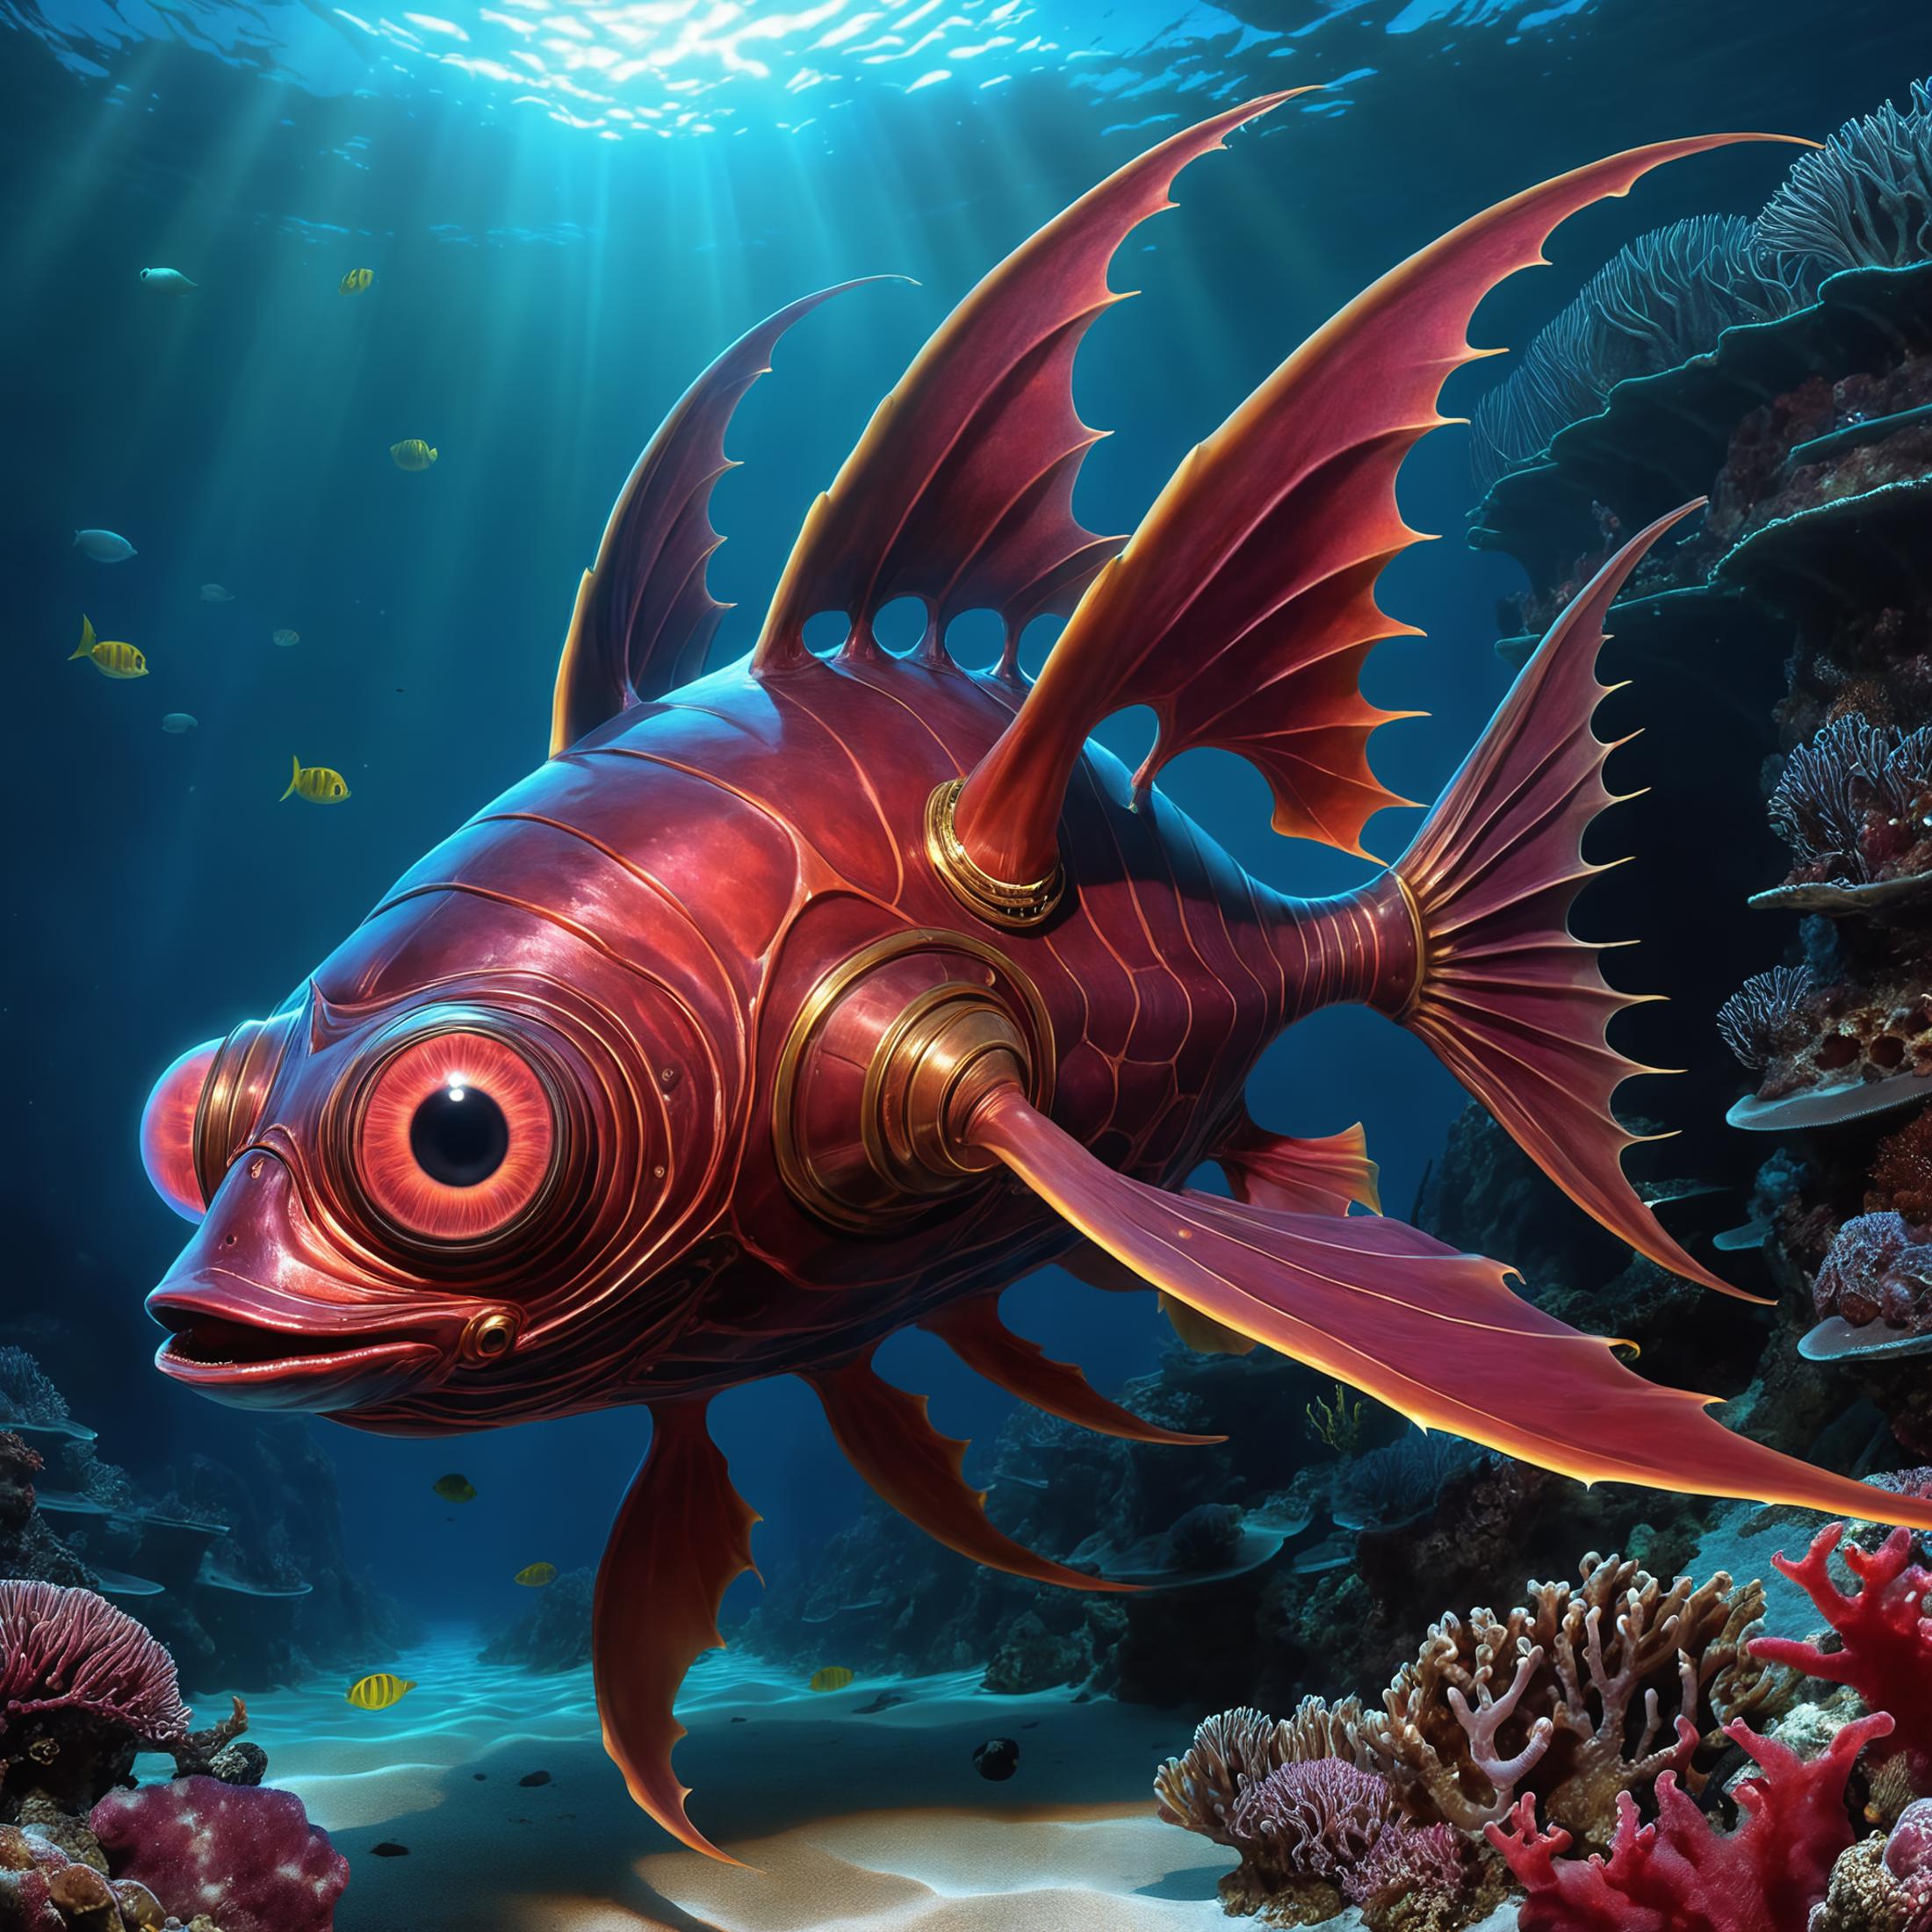 A beautifully detailed, red and gold fish swimming in the ocean.